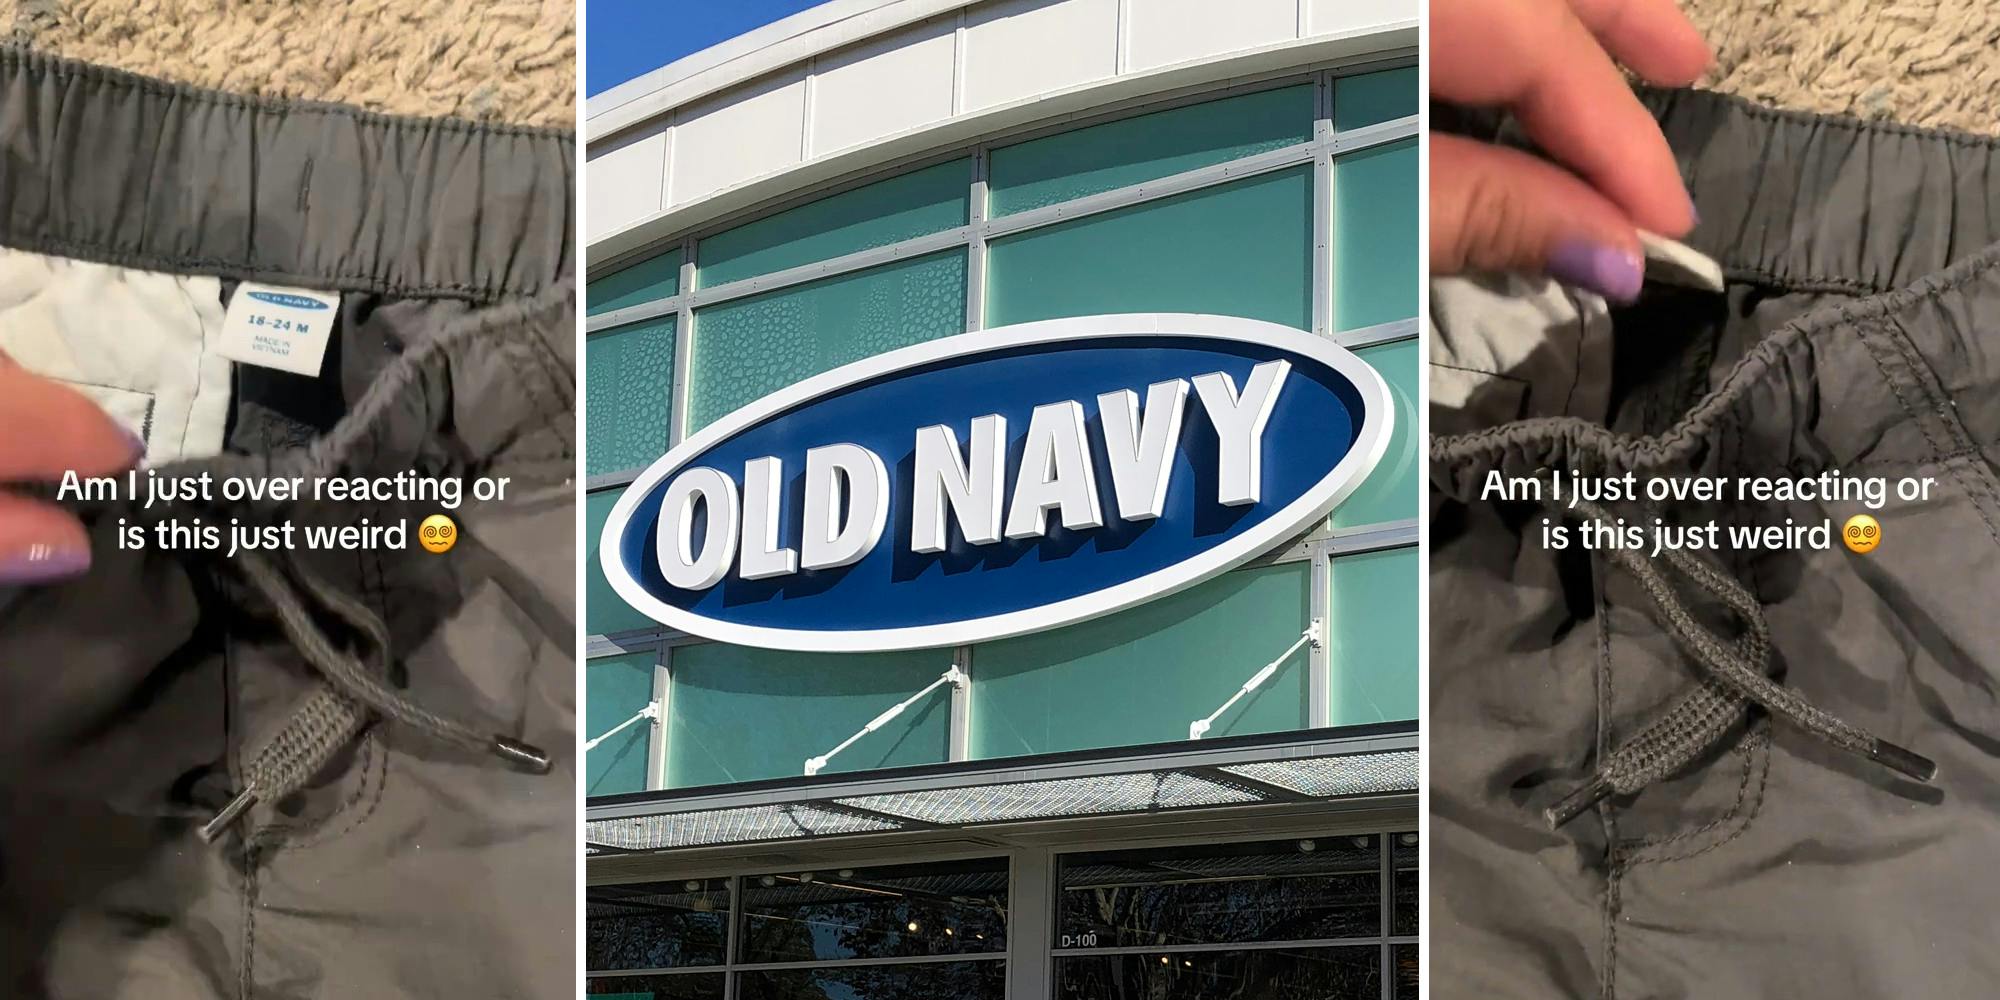 woman checking swimsuit tag with caption "Am I just over reacting or is this just weird" (l&r) Old Navy sign (c)